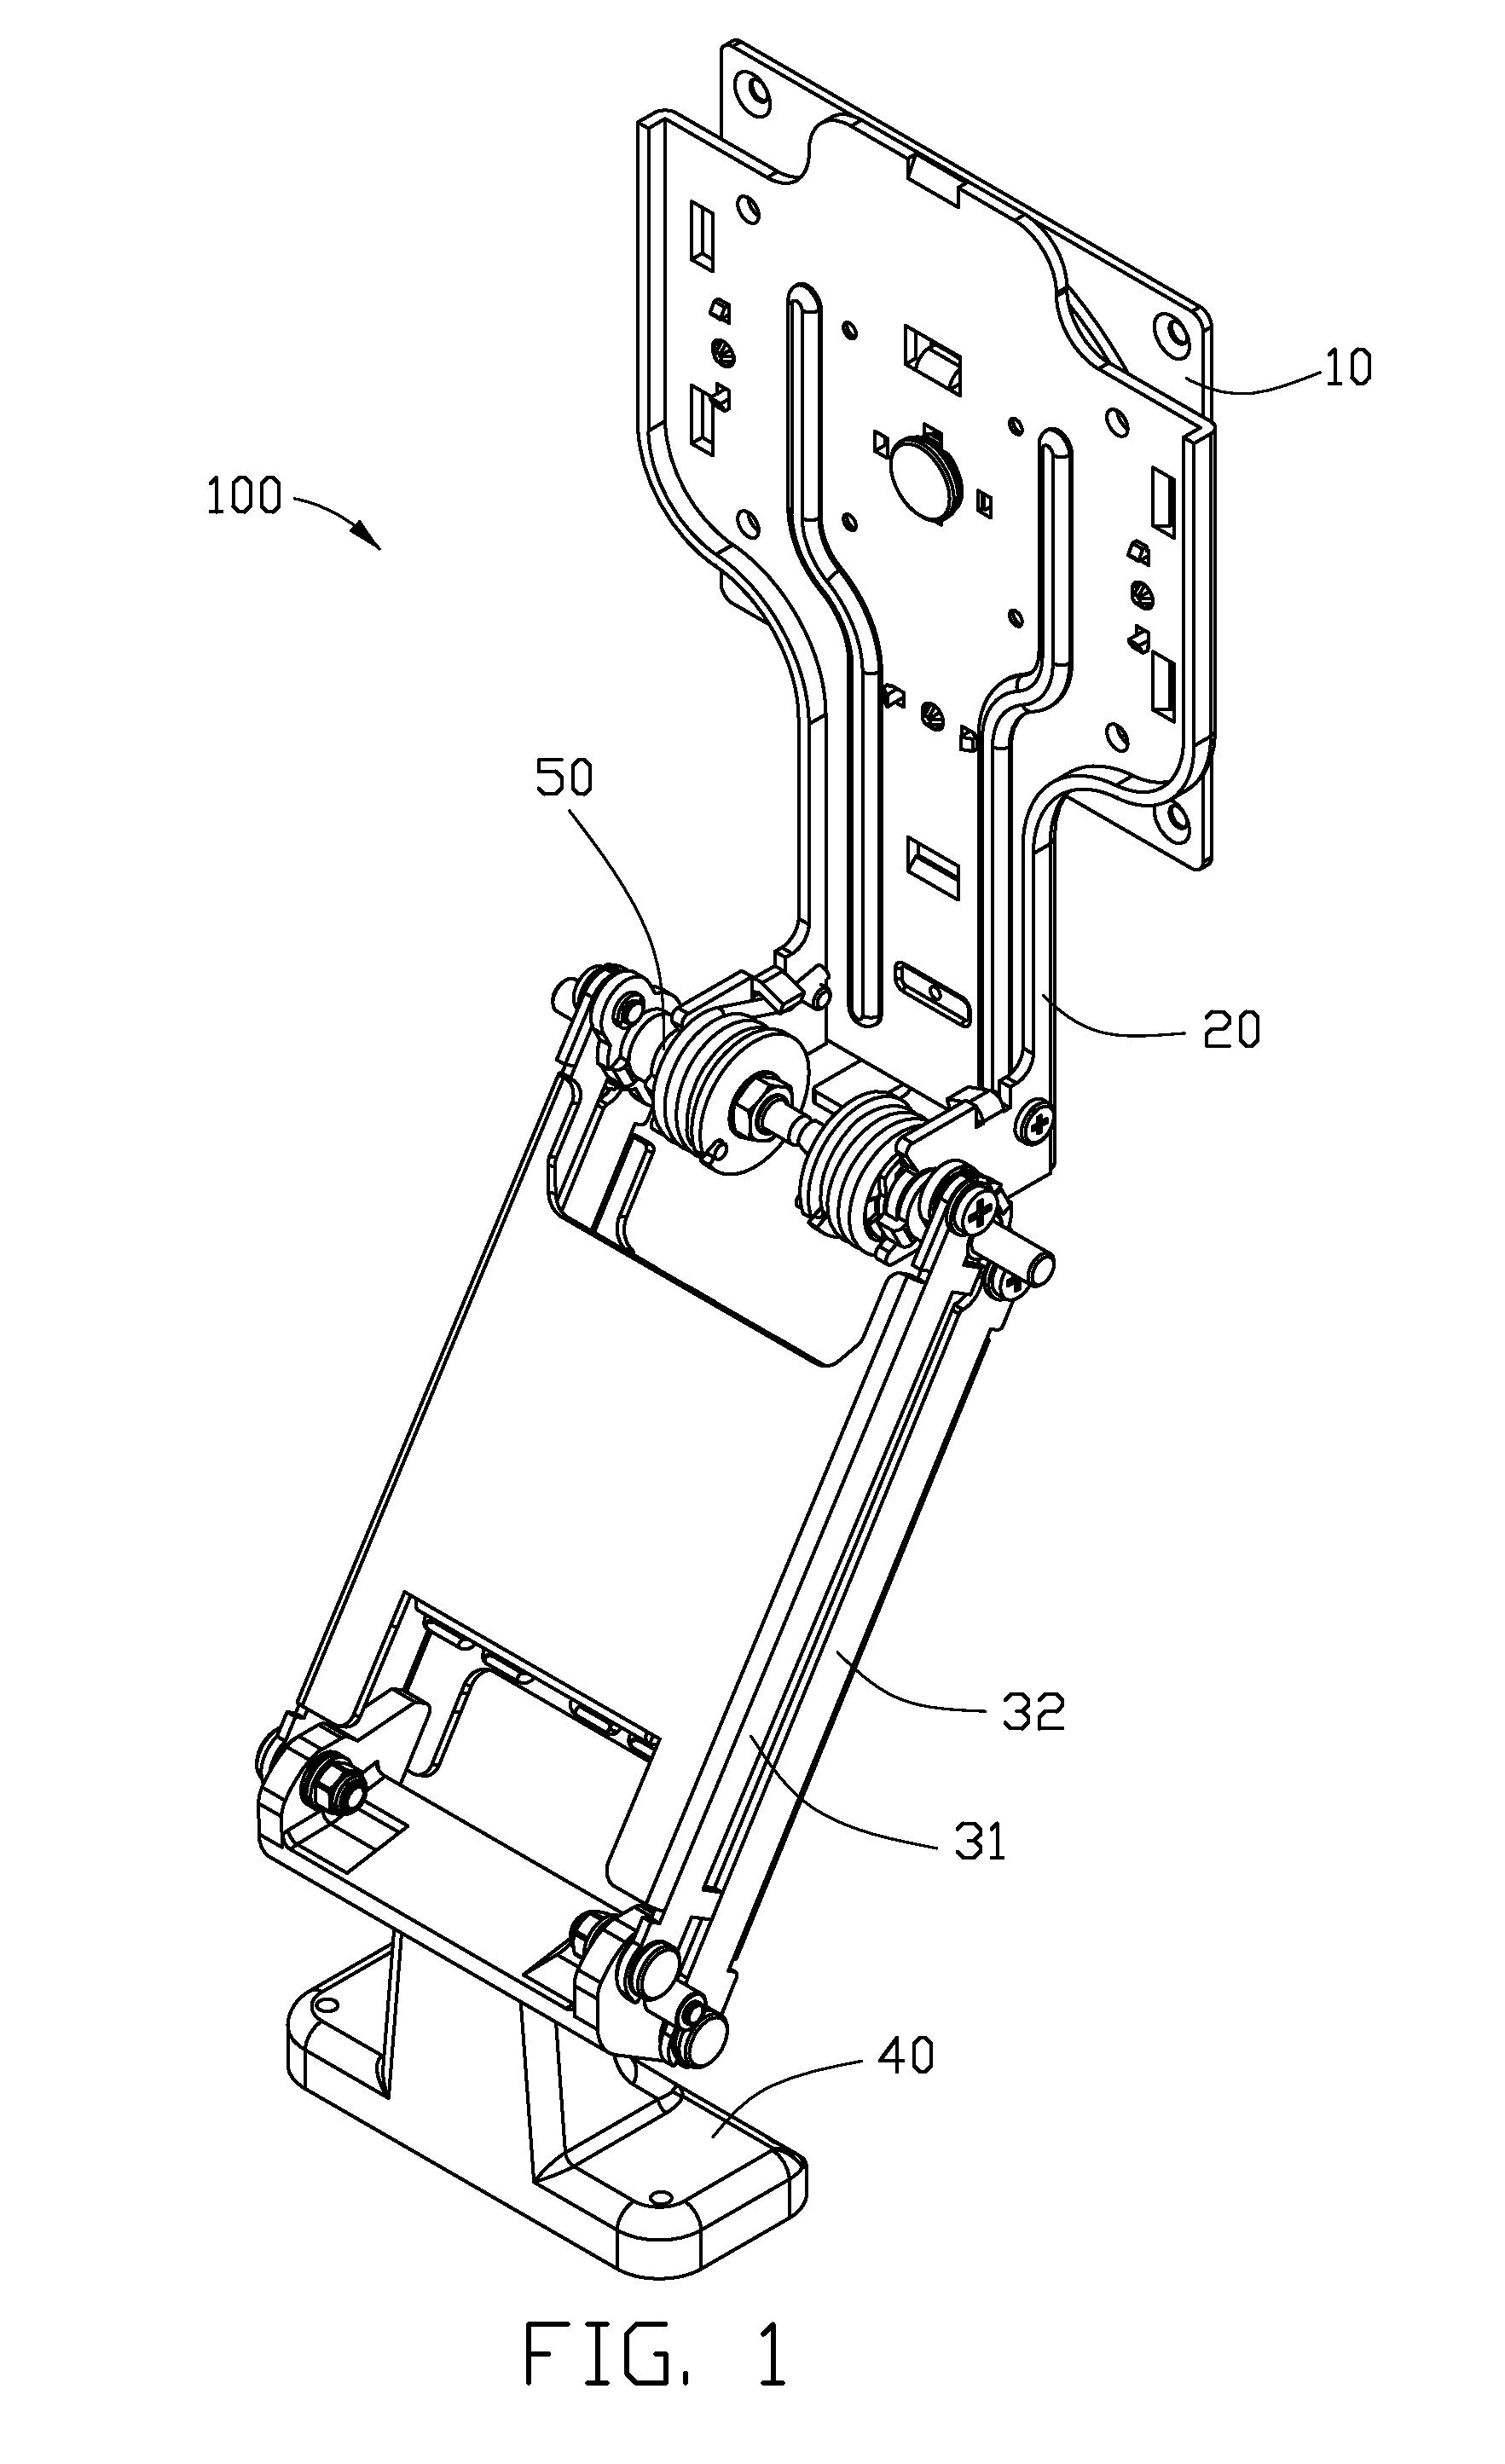 Support stand for flat-panel display monitor and elevating support used for support stand